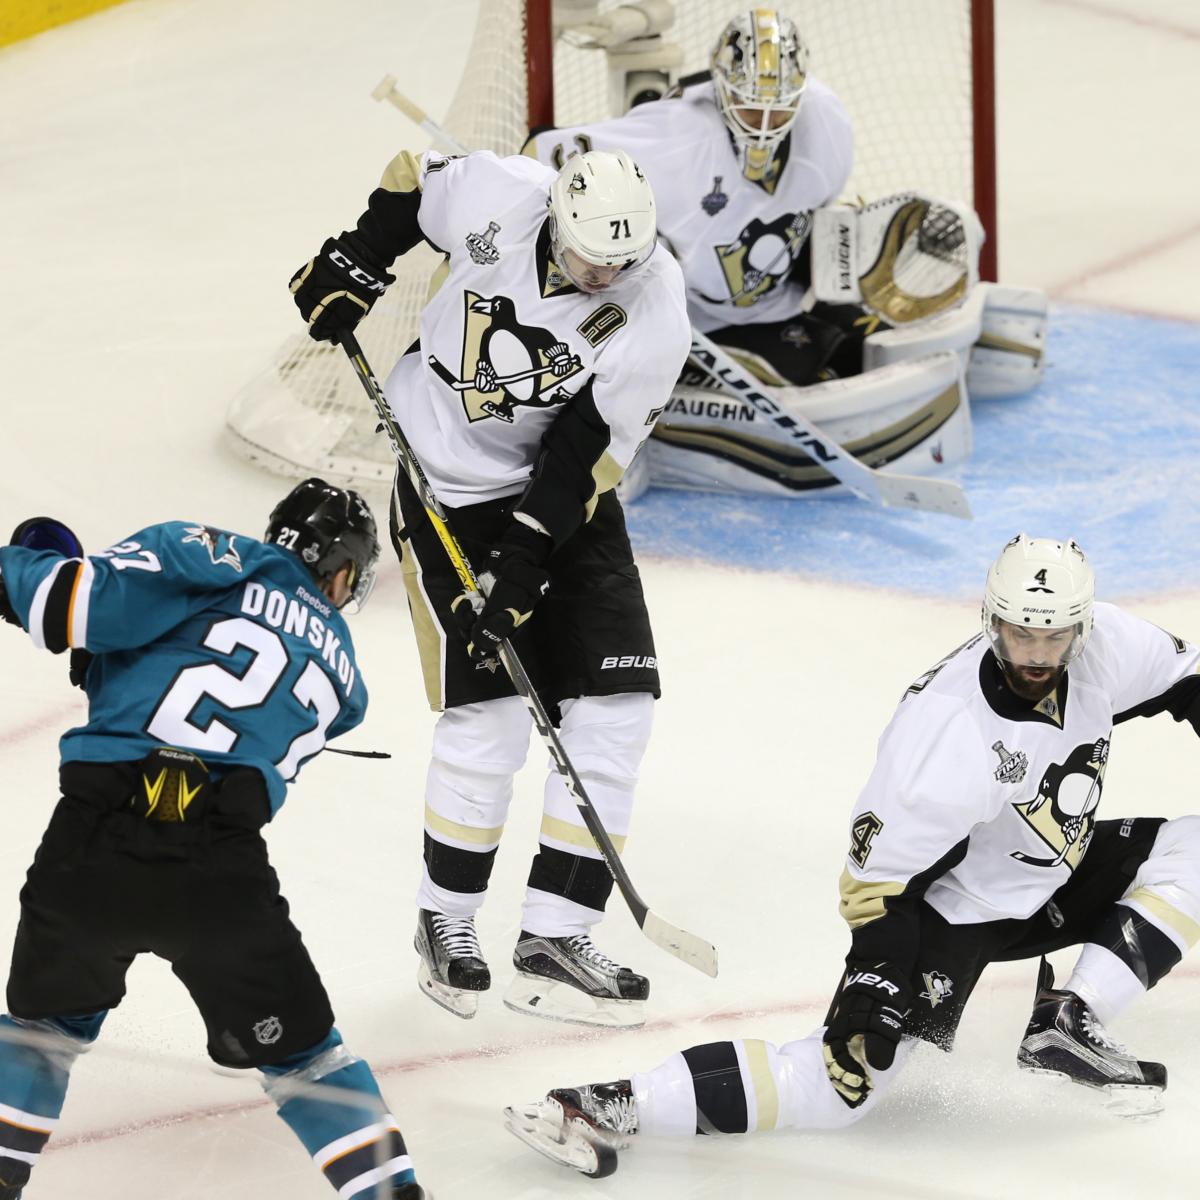 Sharks vs. Penguins Keys to Victory in Game 4 of NHL Stanley Cup Final